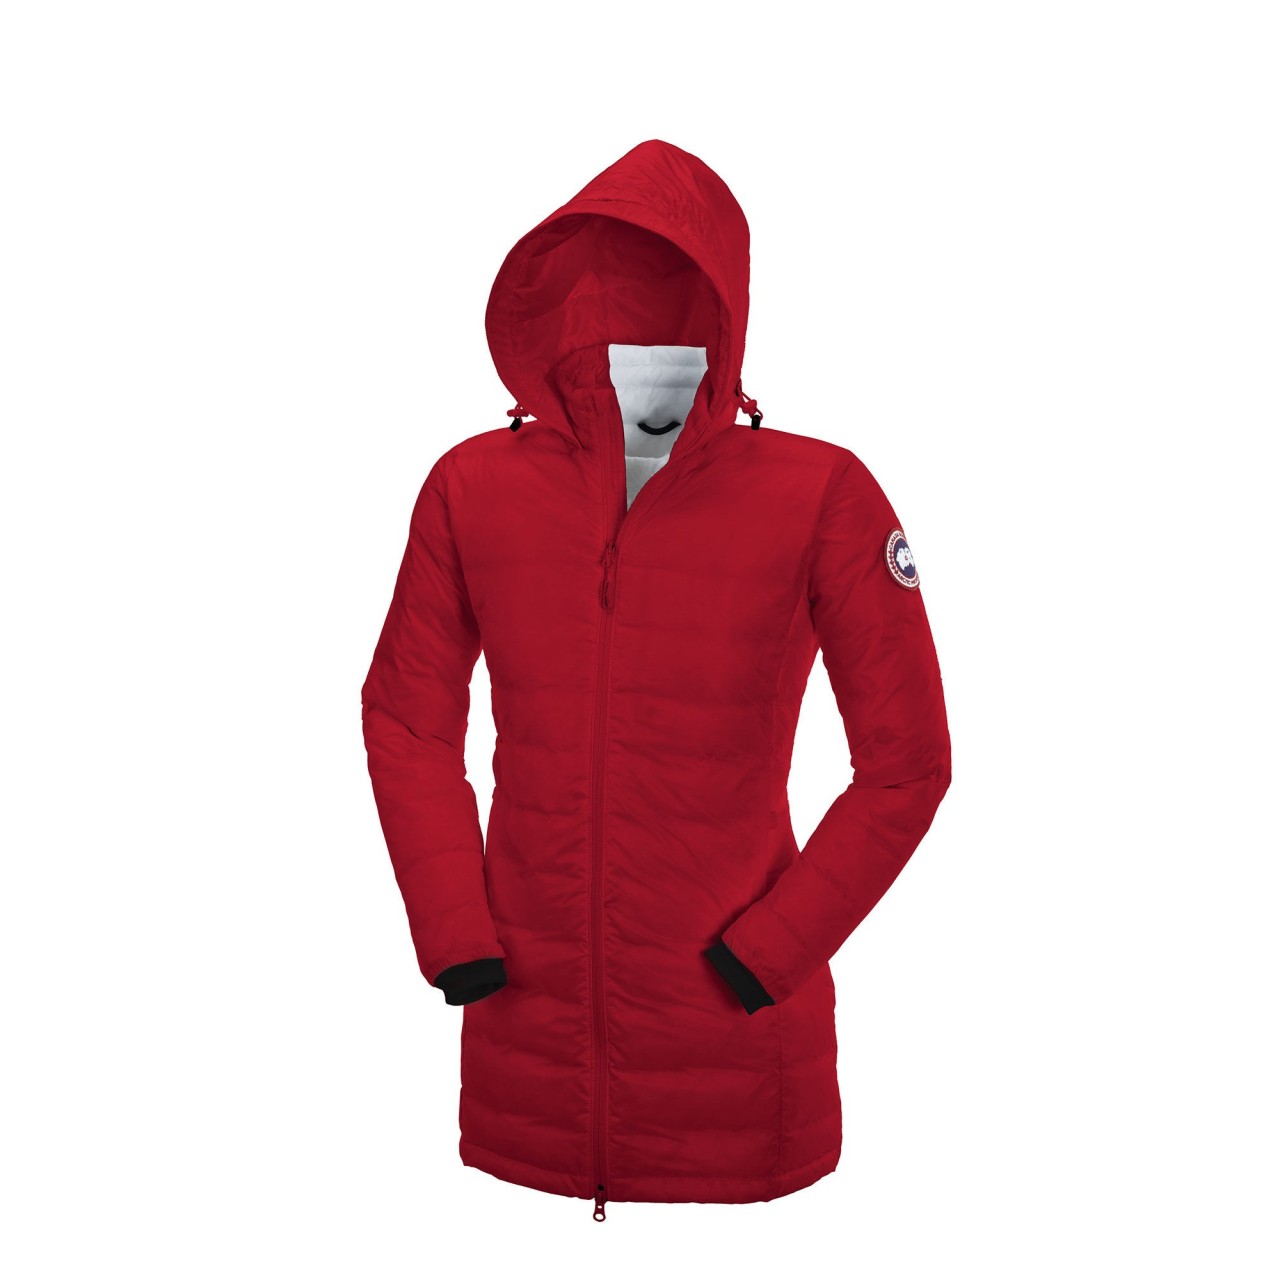 Canada Goose langford parka sale fake - 70% Off Cheap Canada Goose Jackets Sale